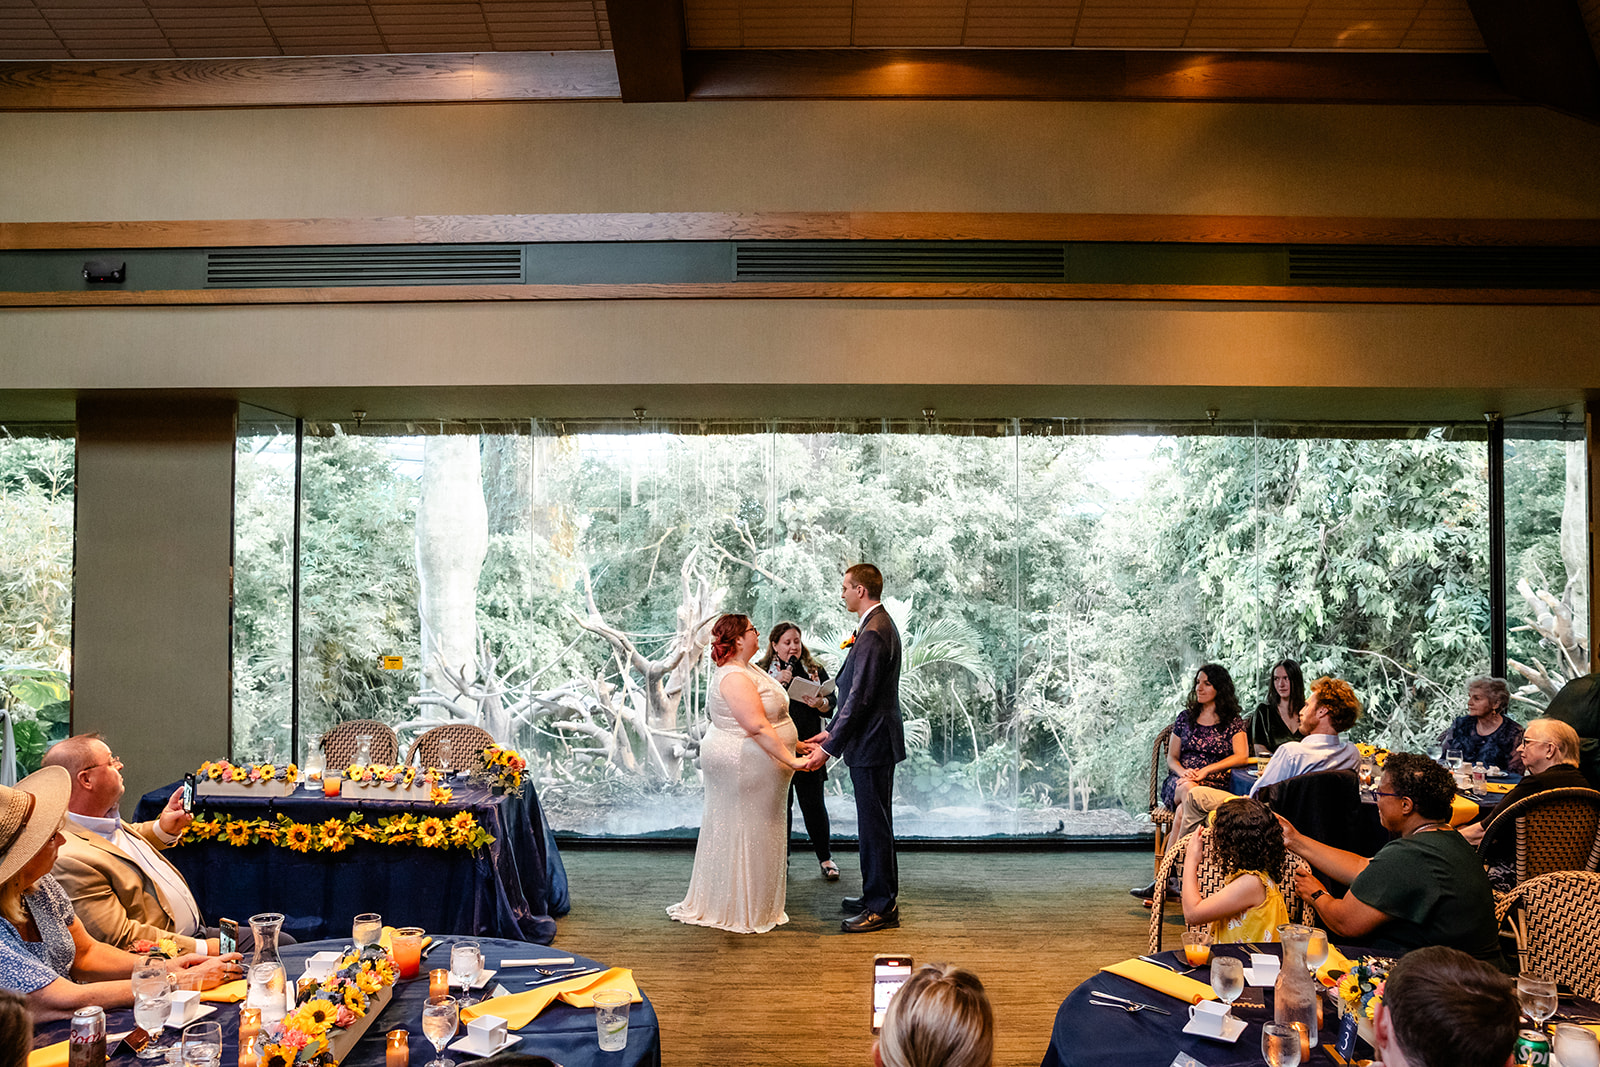 Ceremony at the Treetop Restaurant in Henry Doorly Zoo